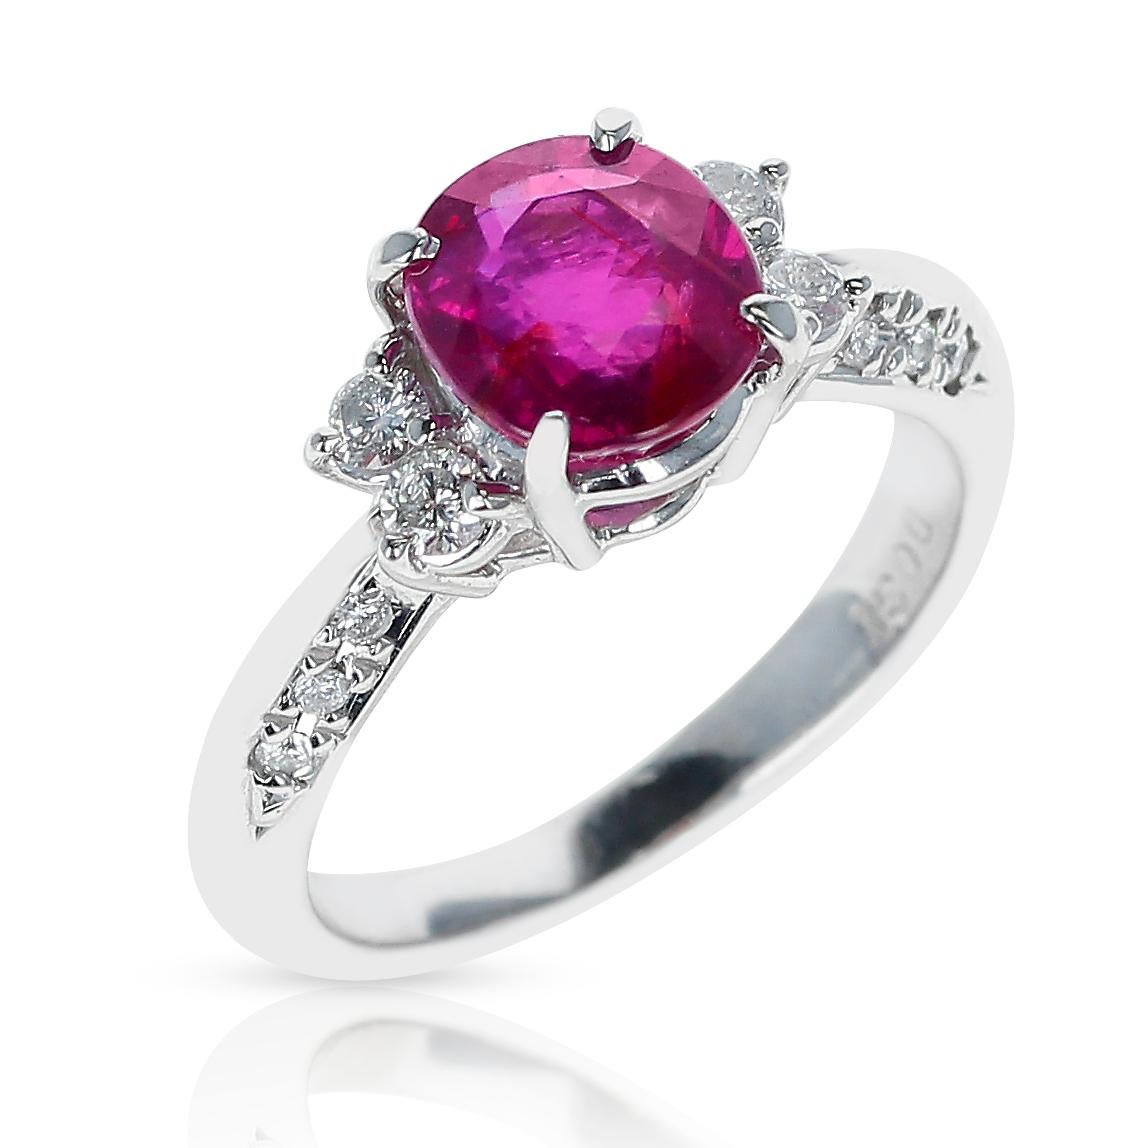 A stunning GIA Unheated Mozambique 2.16 ct. Ruby and Diamond Ring made in Platinum. 

The diamonds weigh 0.35 carats. The ring size is 5.75 US. The total weight of the ring is 5.96 grams.

SKU 133-RBITJYJU